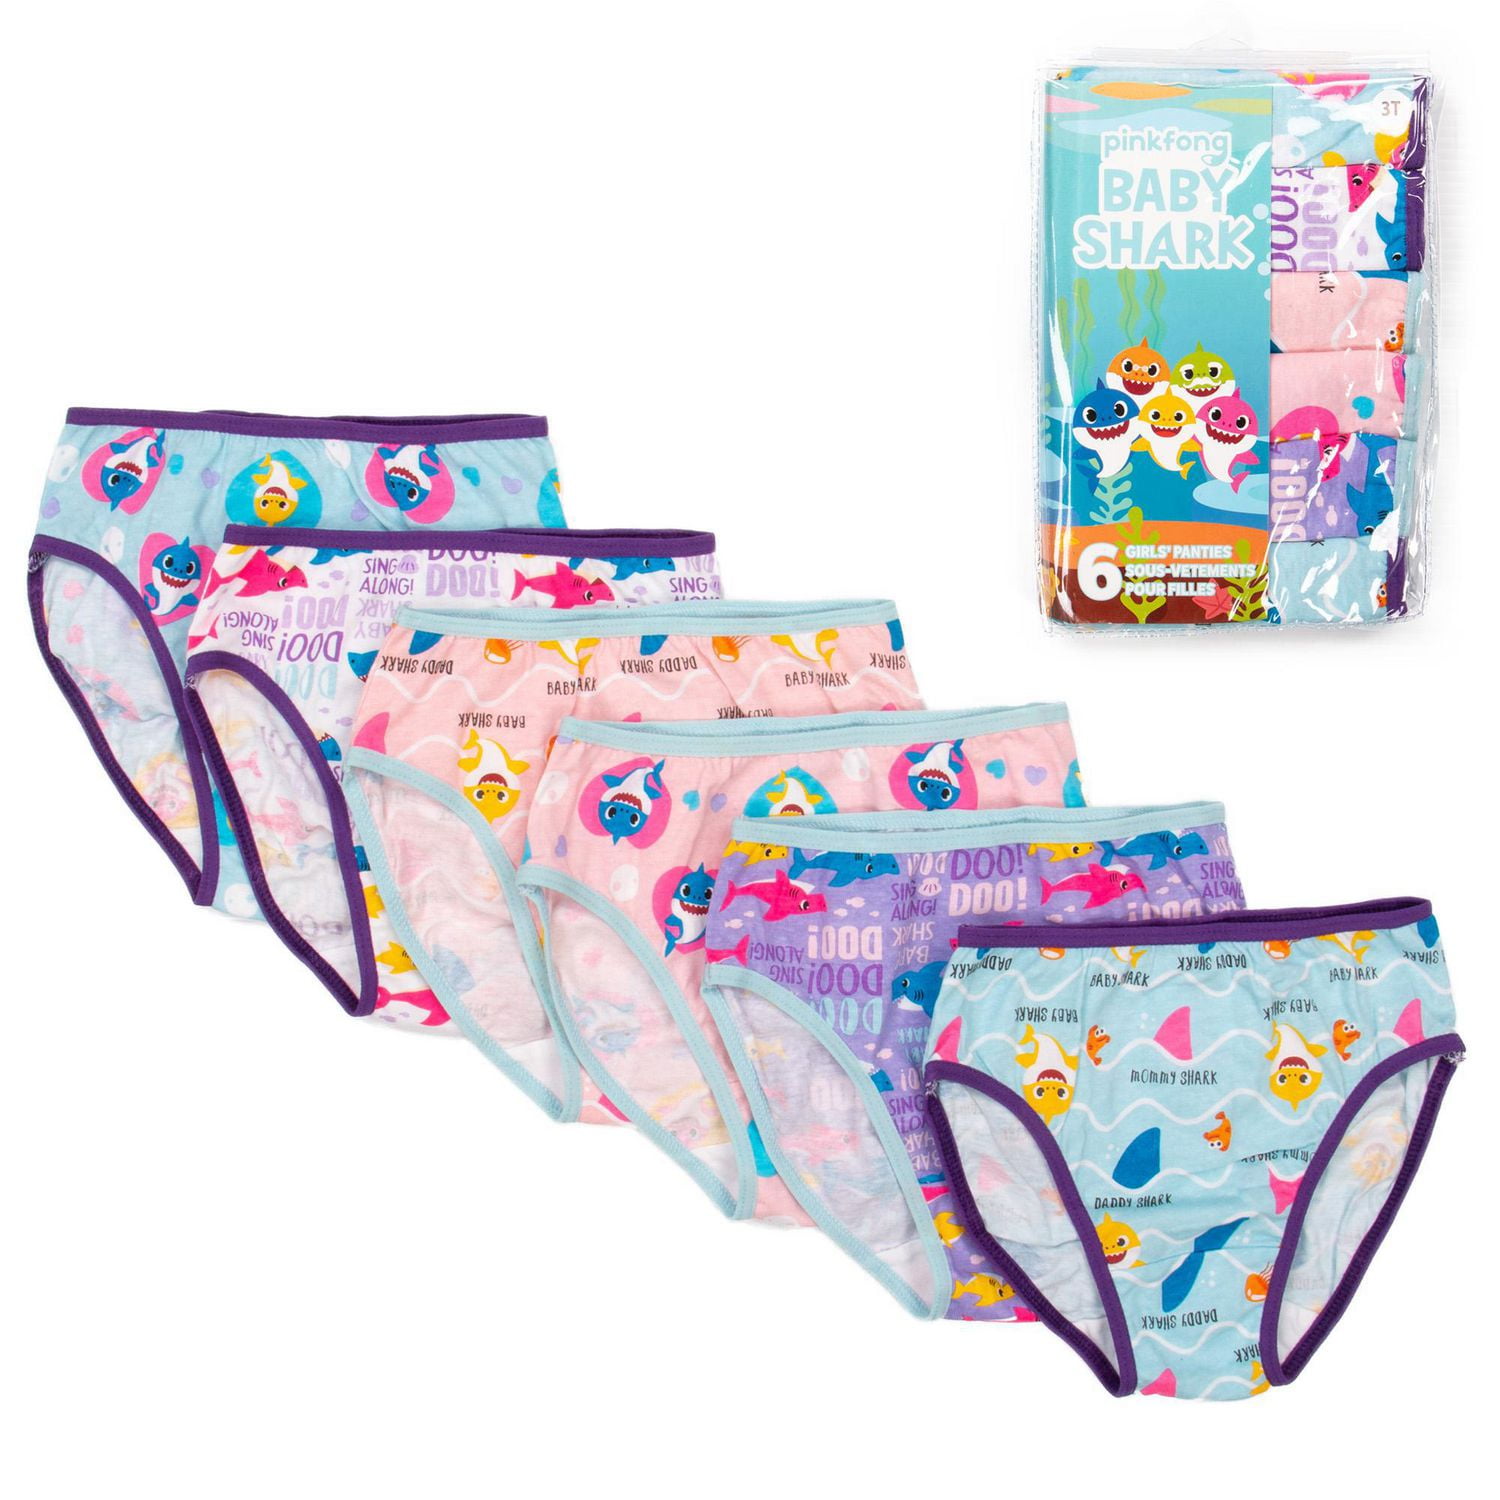 Toddler Size 4T White, Pink & Blue Briefs With Coloring Page, 5-Pack